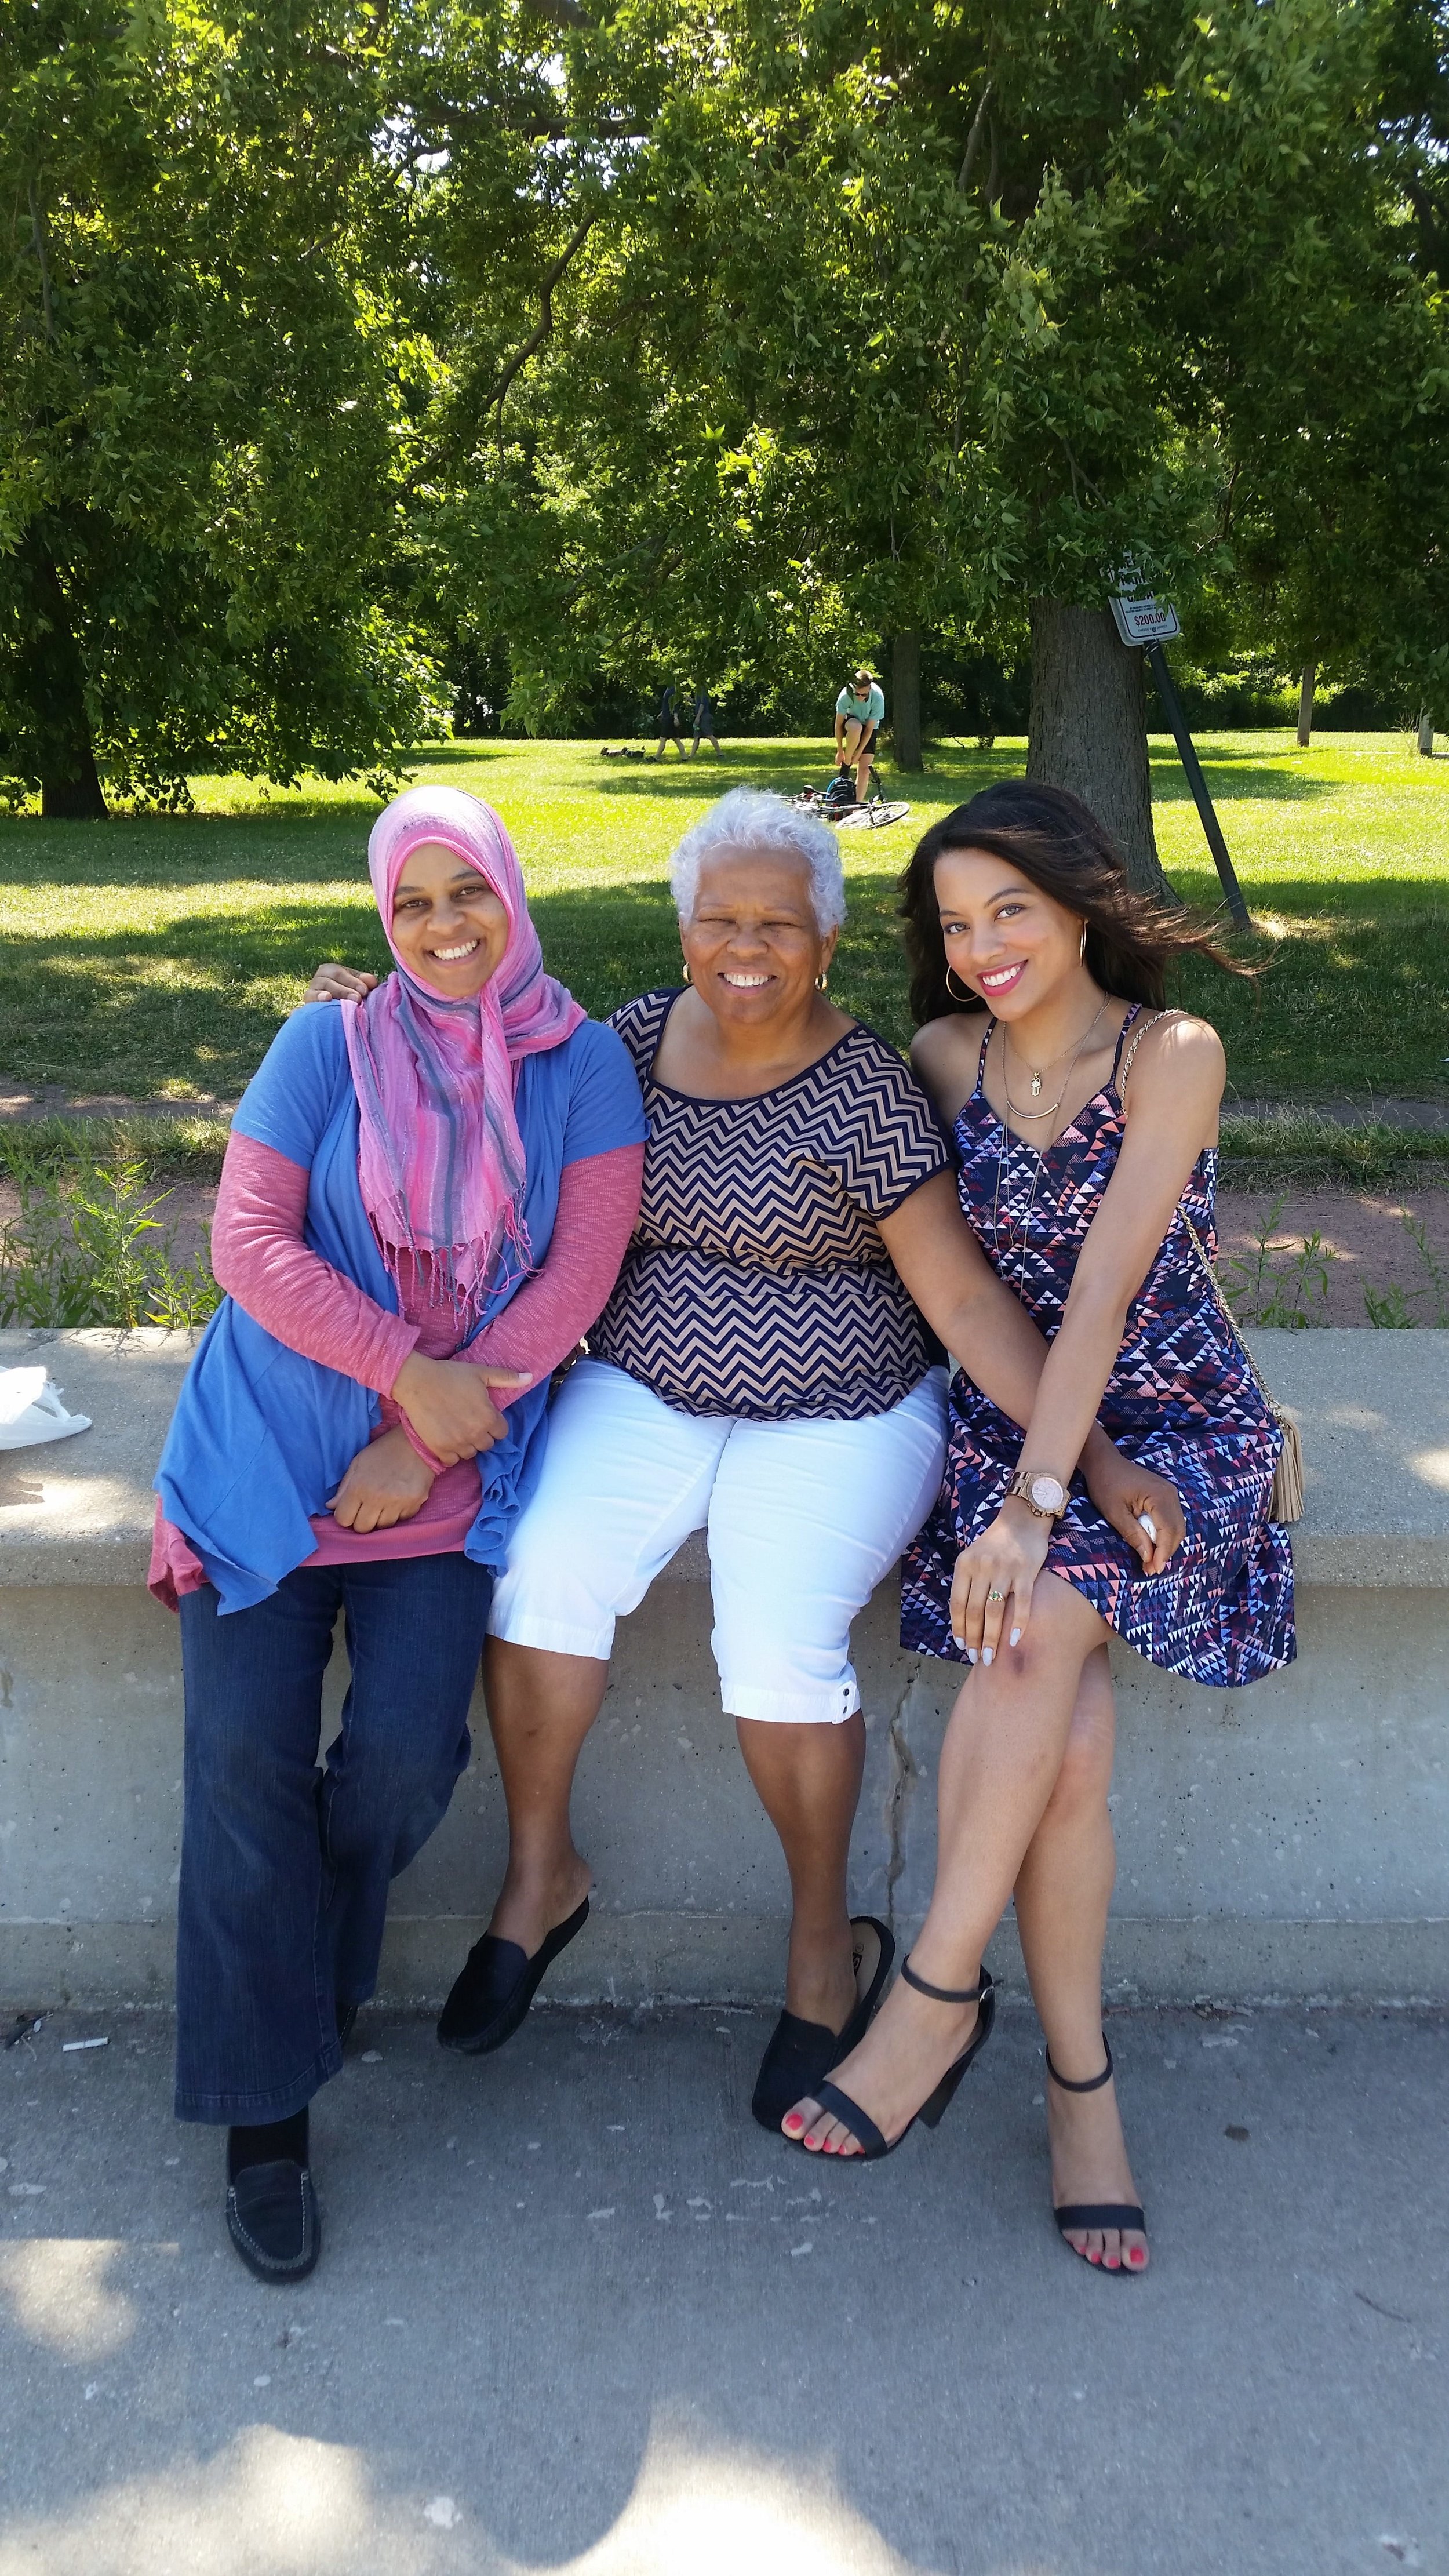 My aunt, grandmother and I